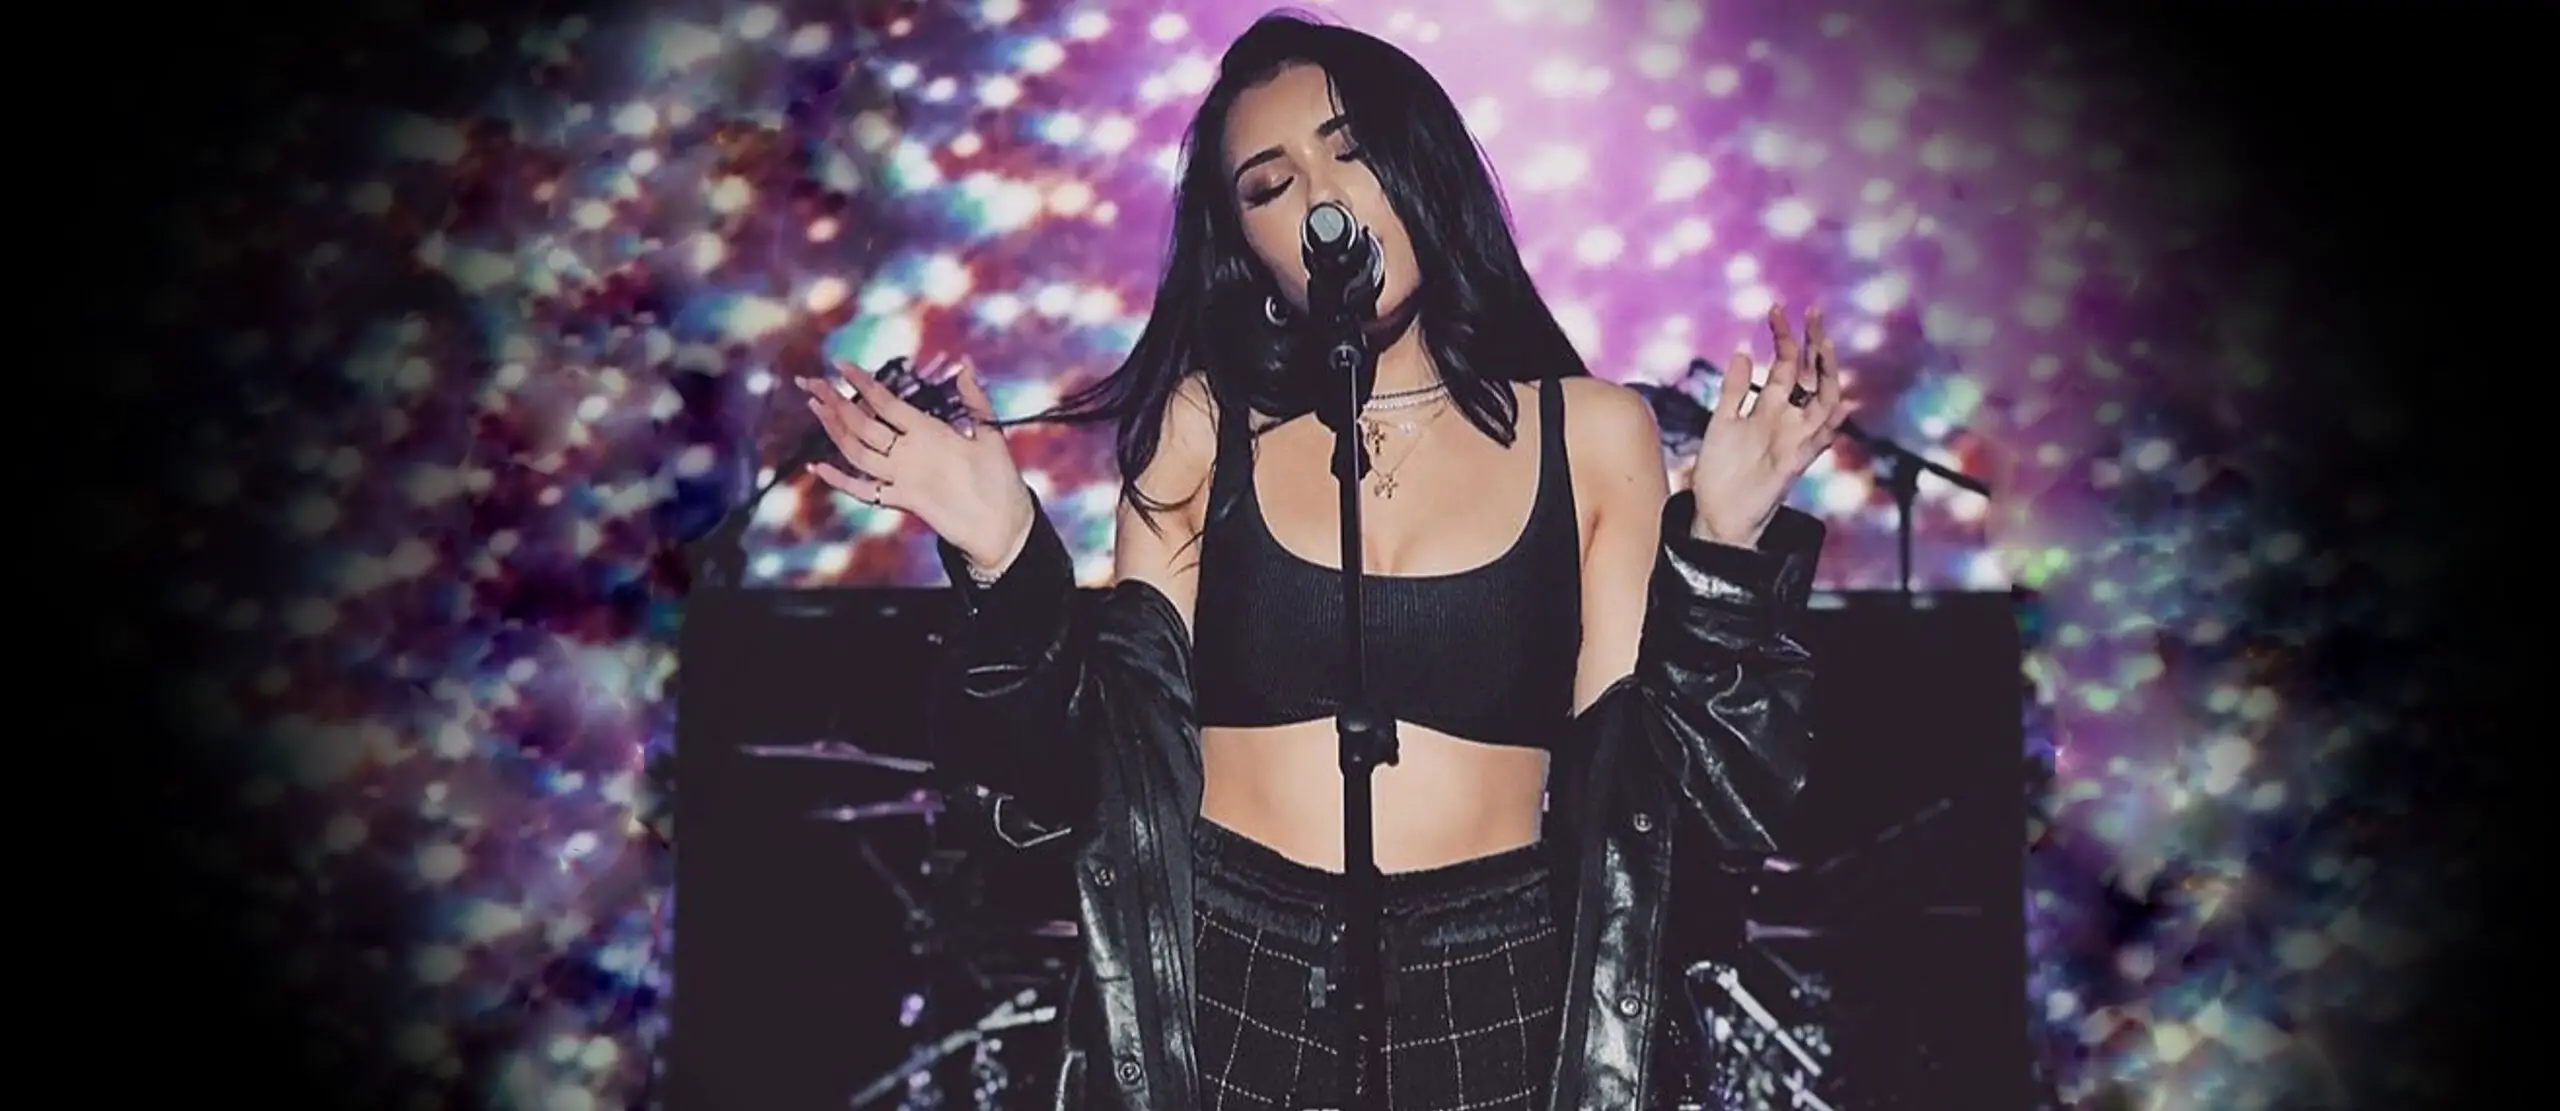 Experience the ‘Immersive Reality’ Concert Experience with Madison Beer at CES